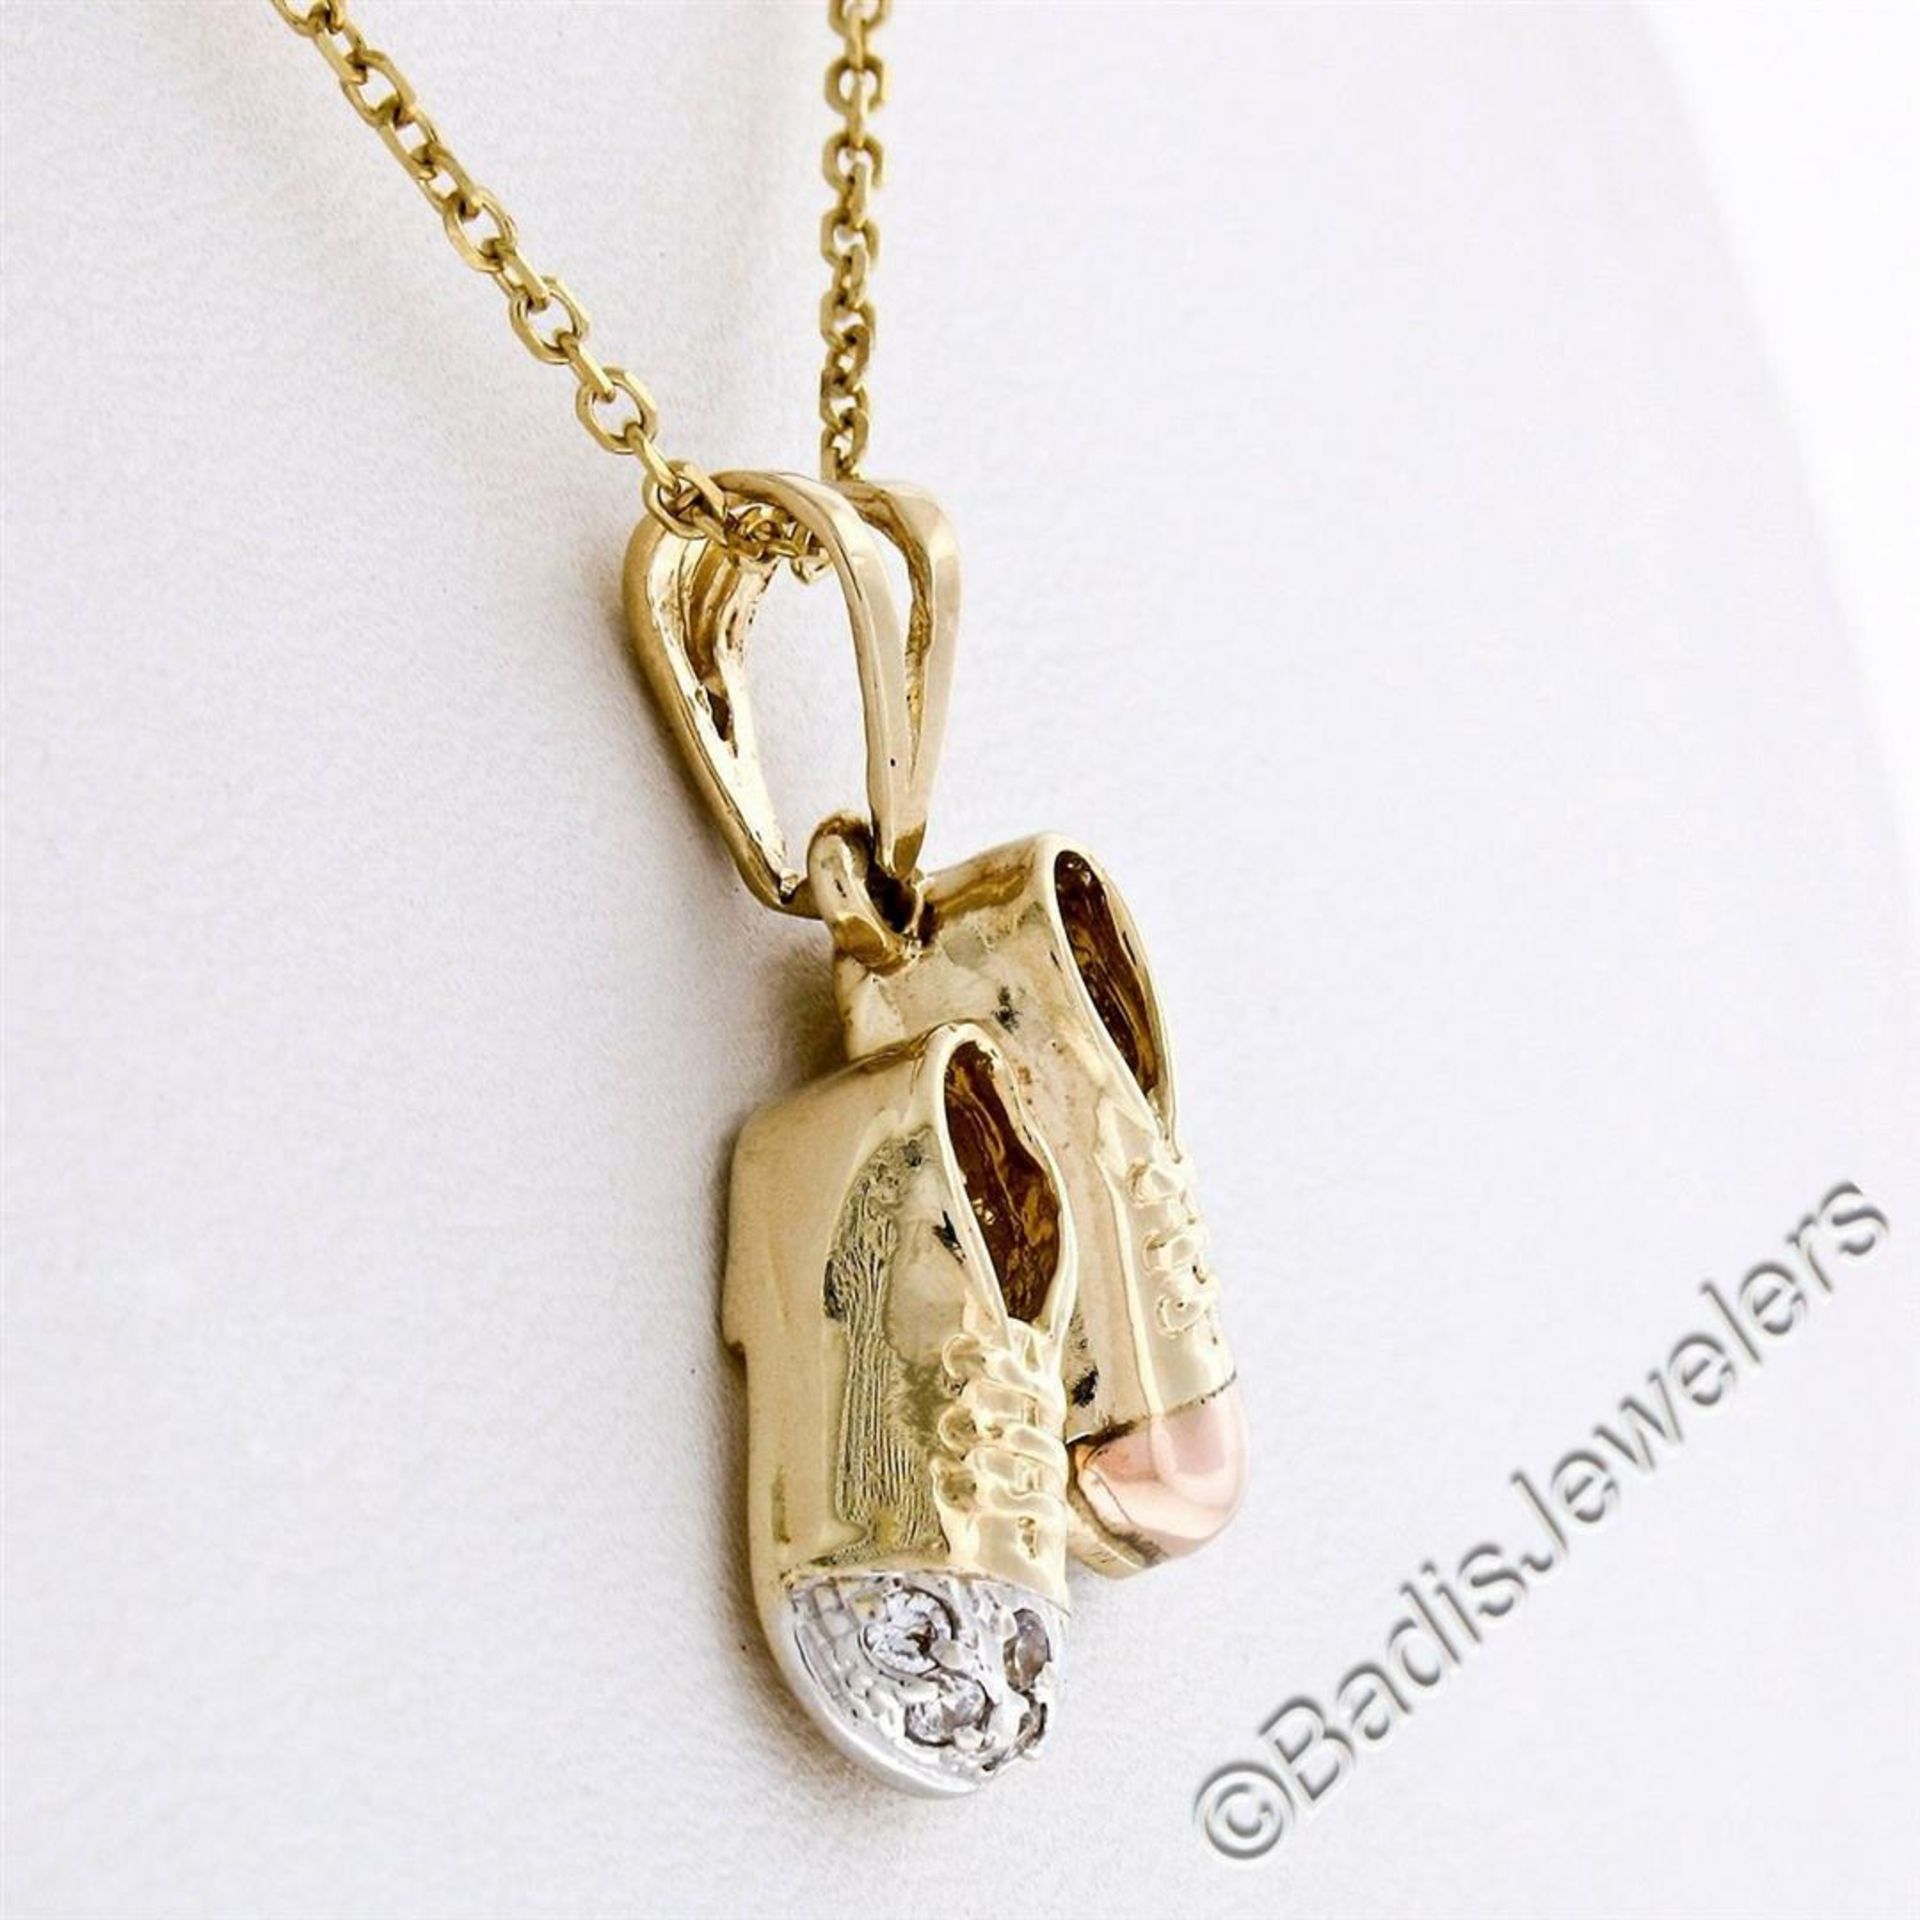 14kt Yellow White and Rose Gold Dual Baby Shoe Pendant Necklace w/ 5 Round Diamo - Image 5 of 8